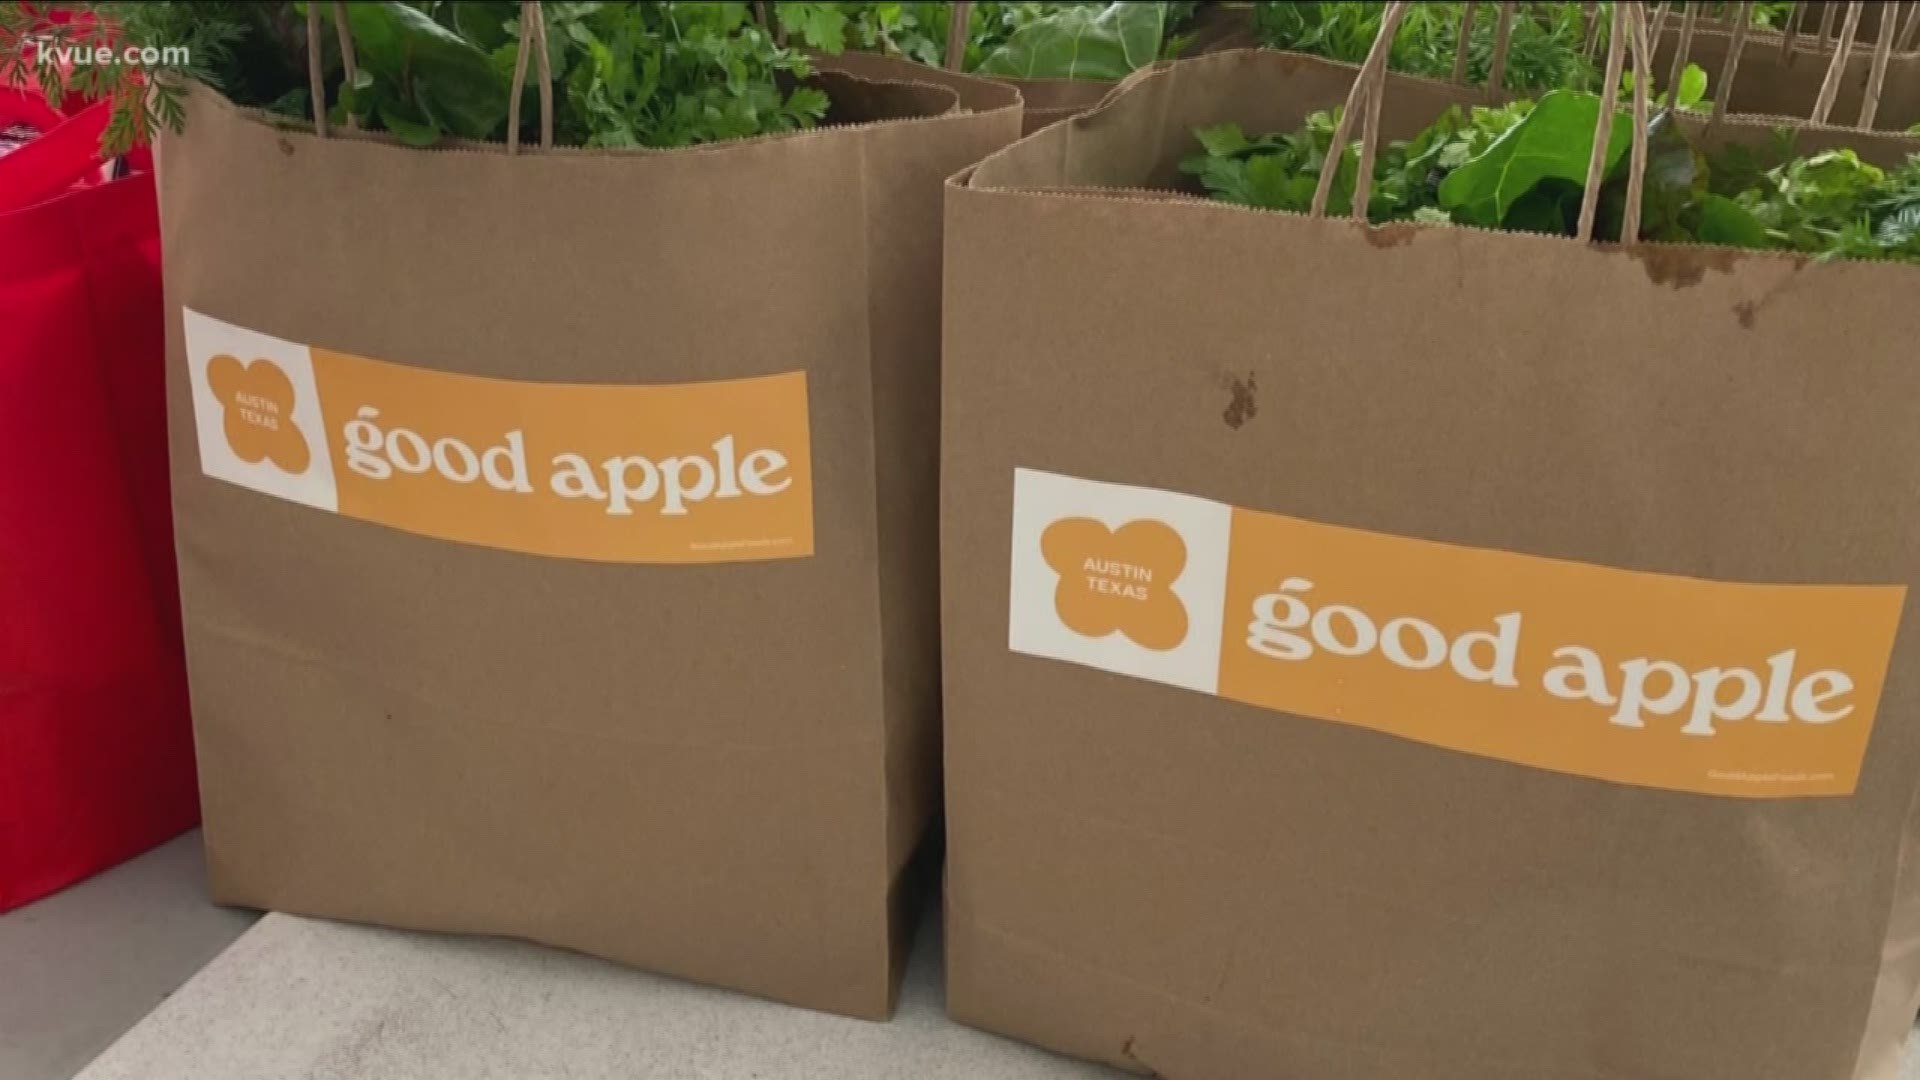 An organization working to end food insecurity is teaming up with the City during the pandemic.